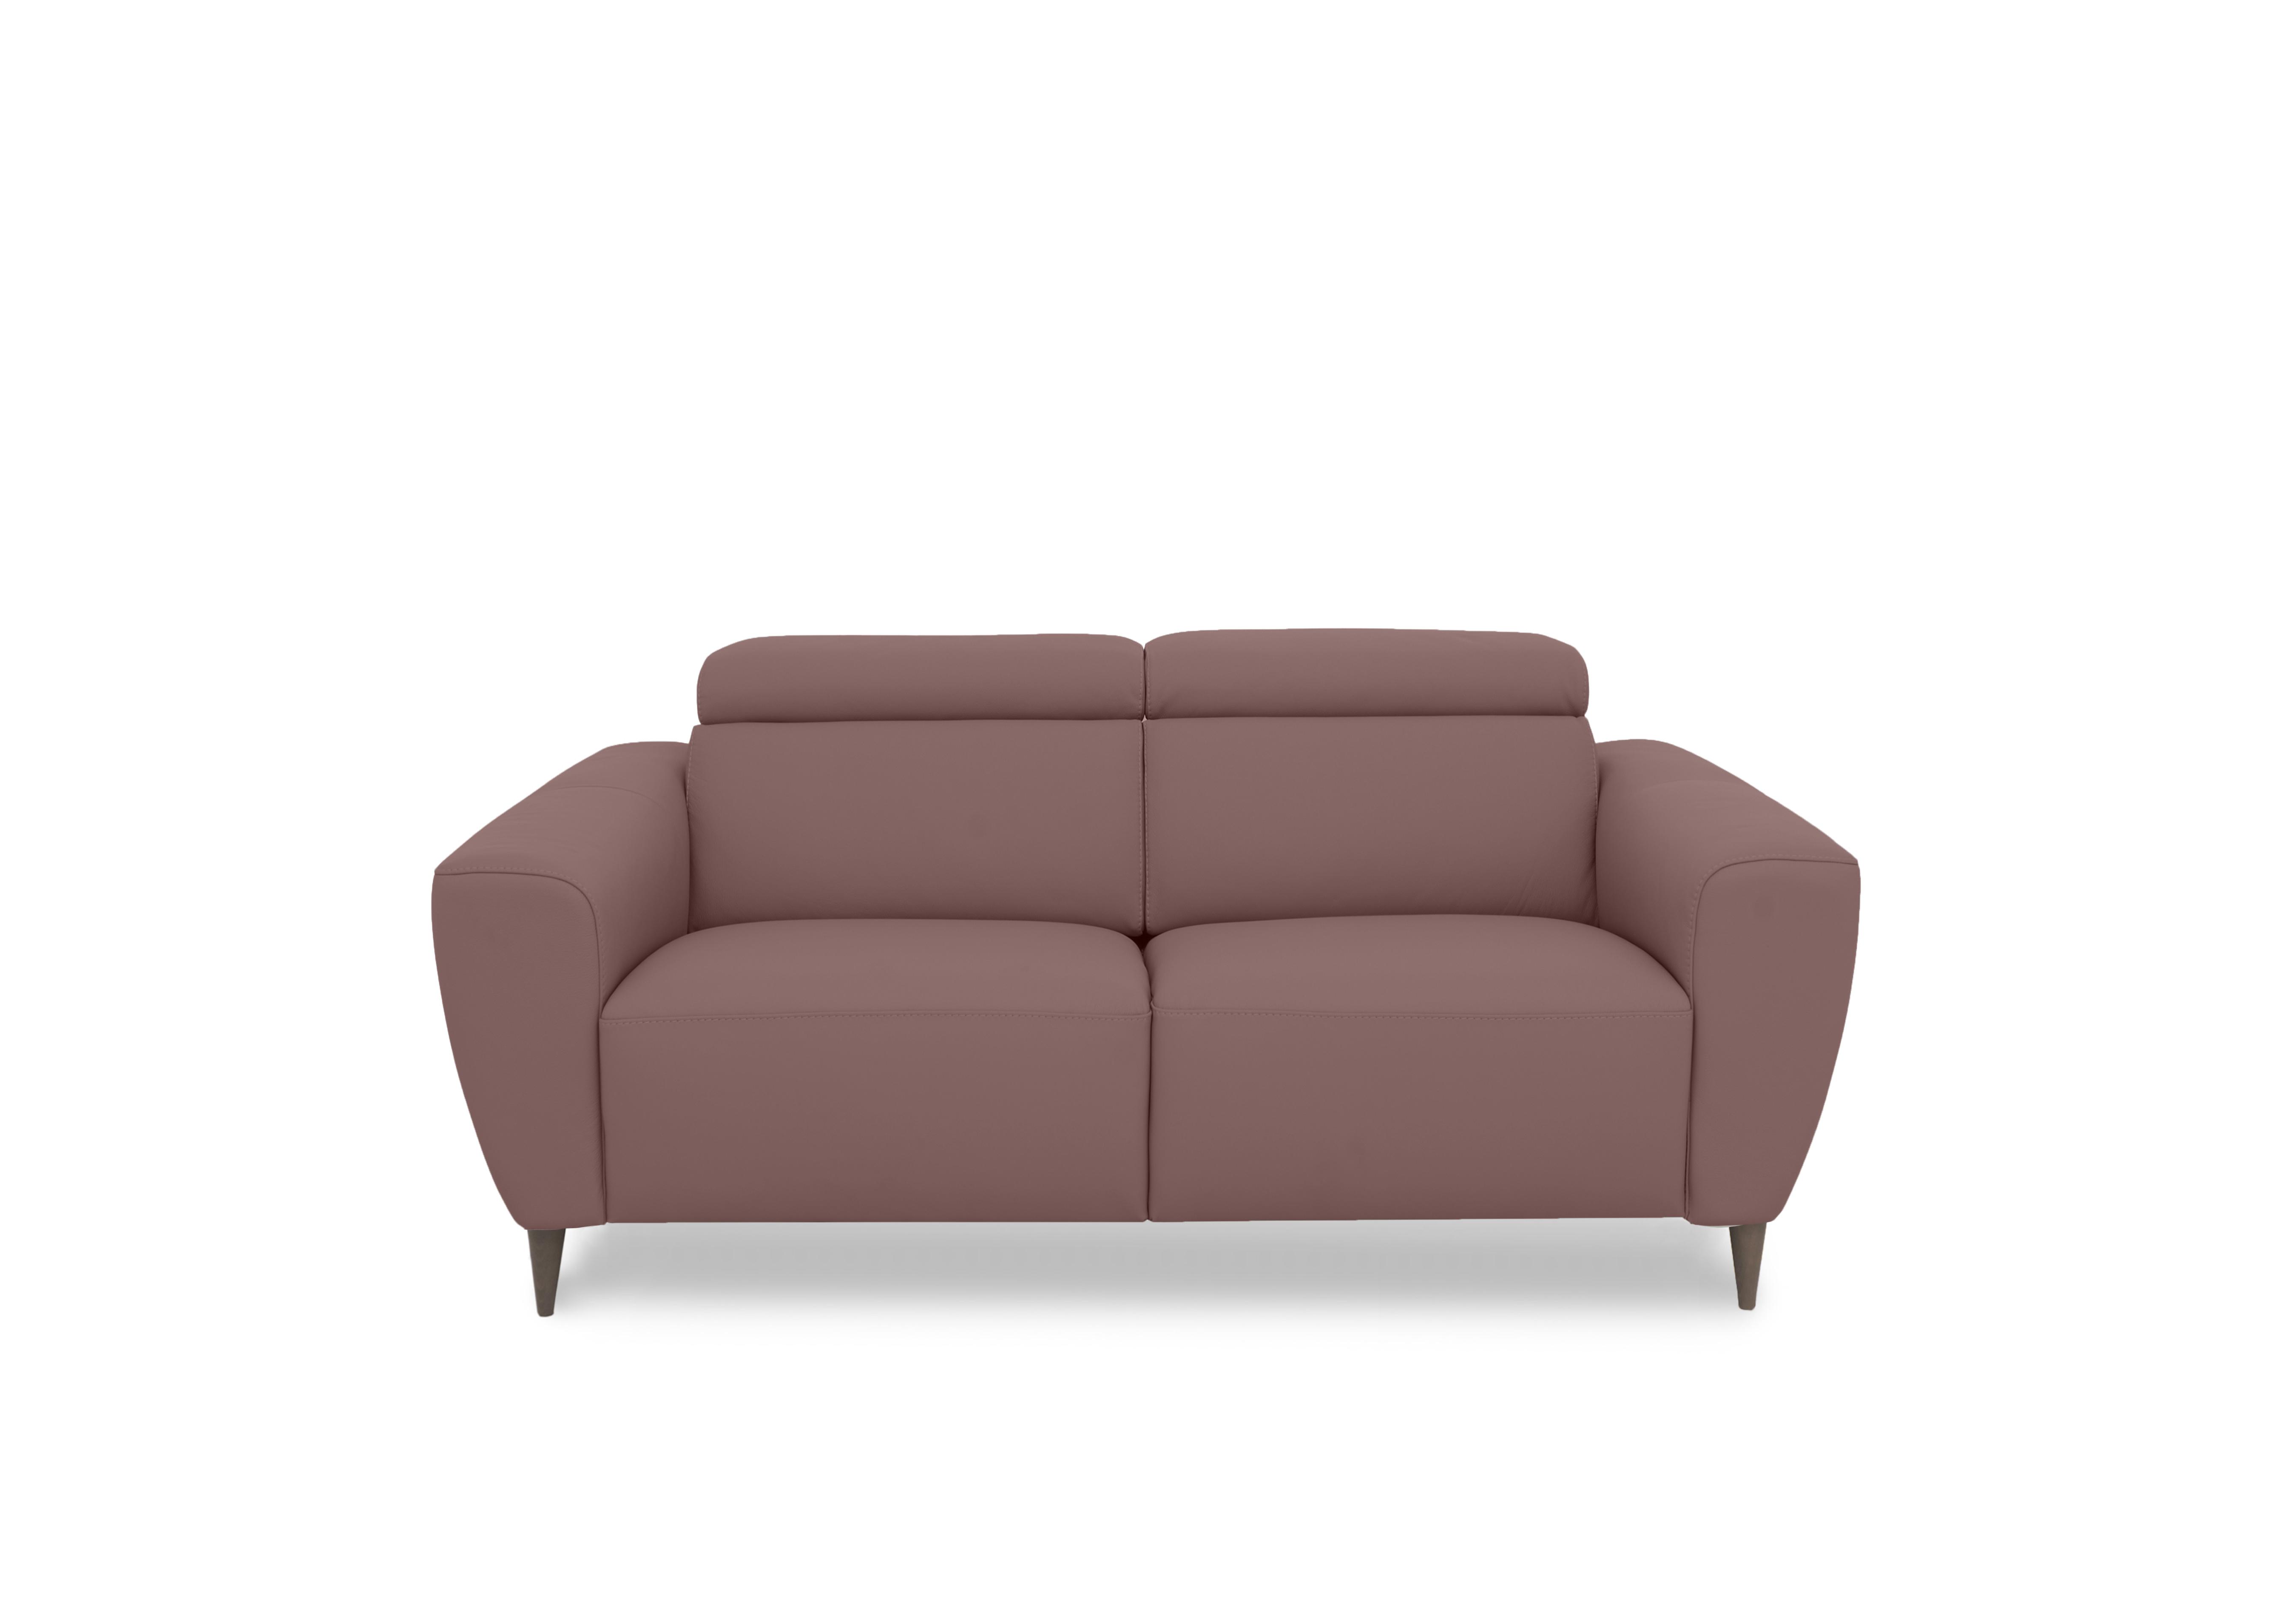 Milano 2 Seater Leather Sofa in 2160 Botero Cipria To Ft on Furniture Village